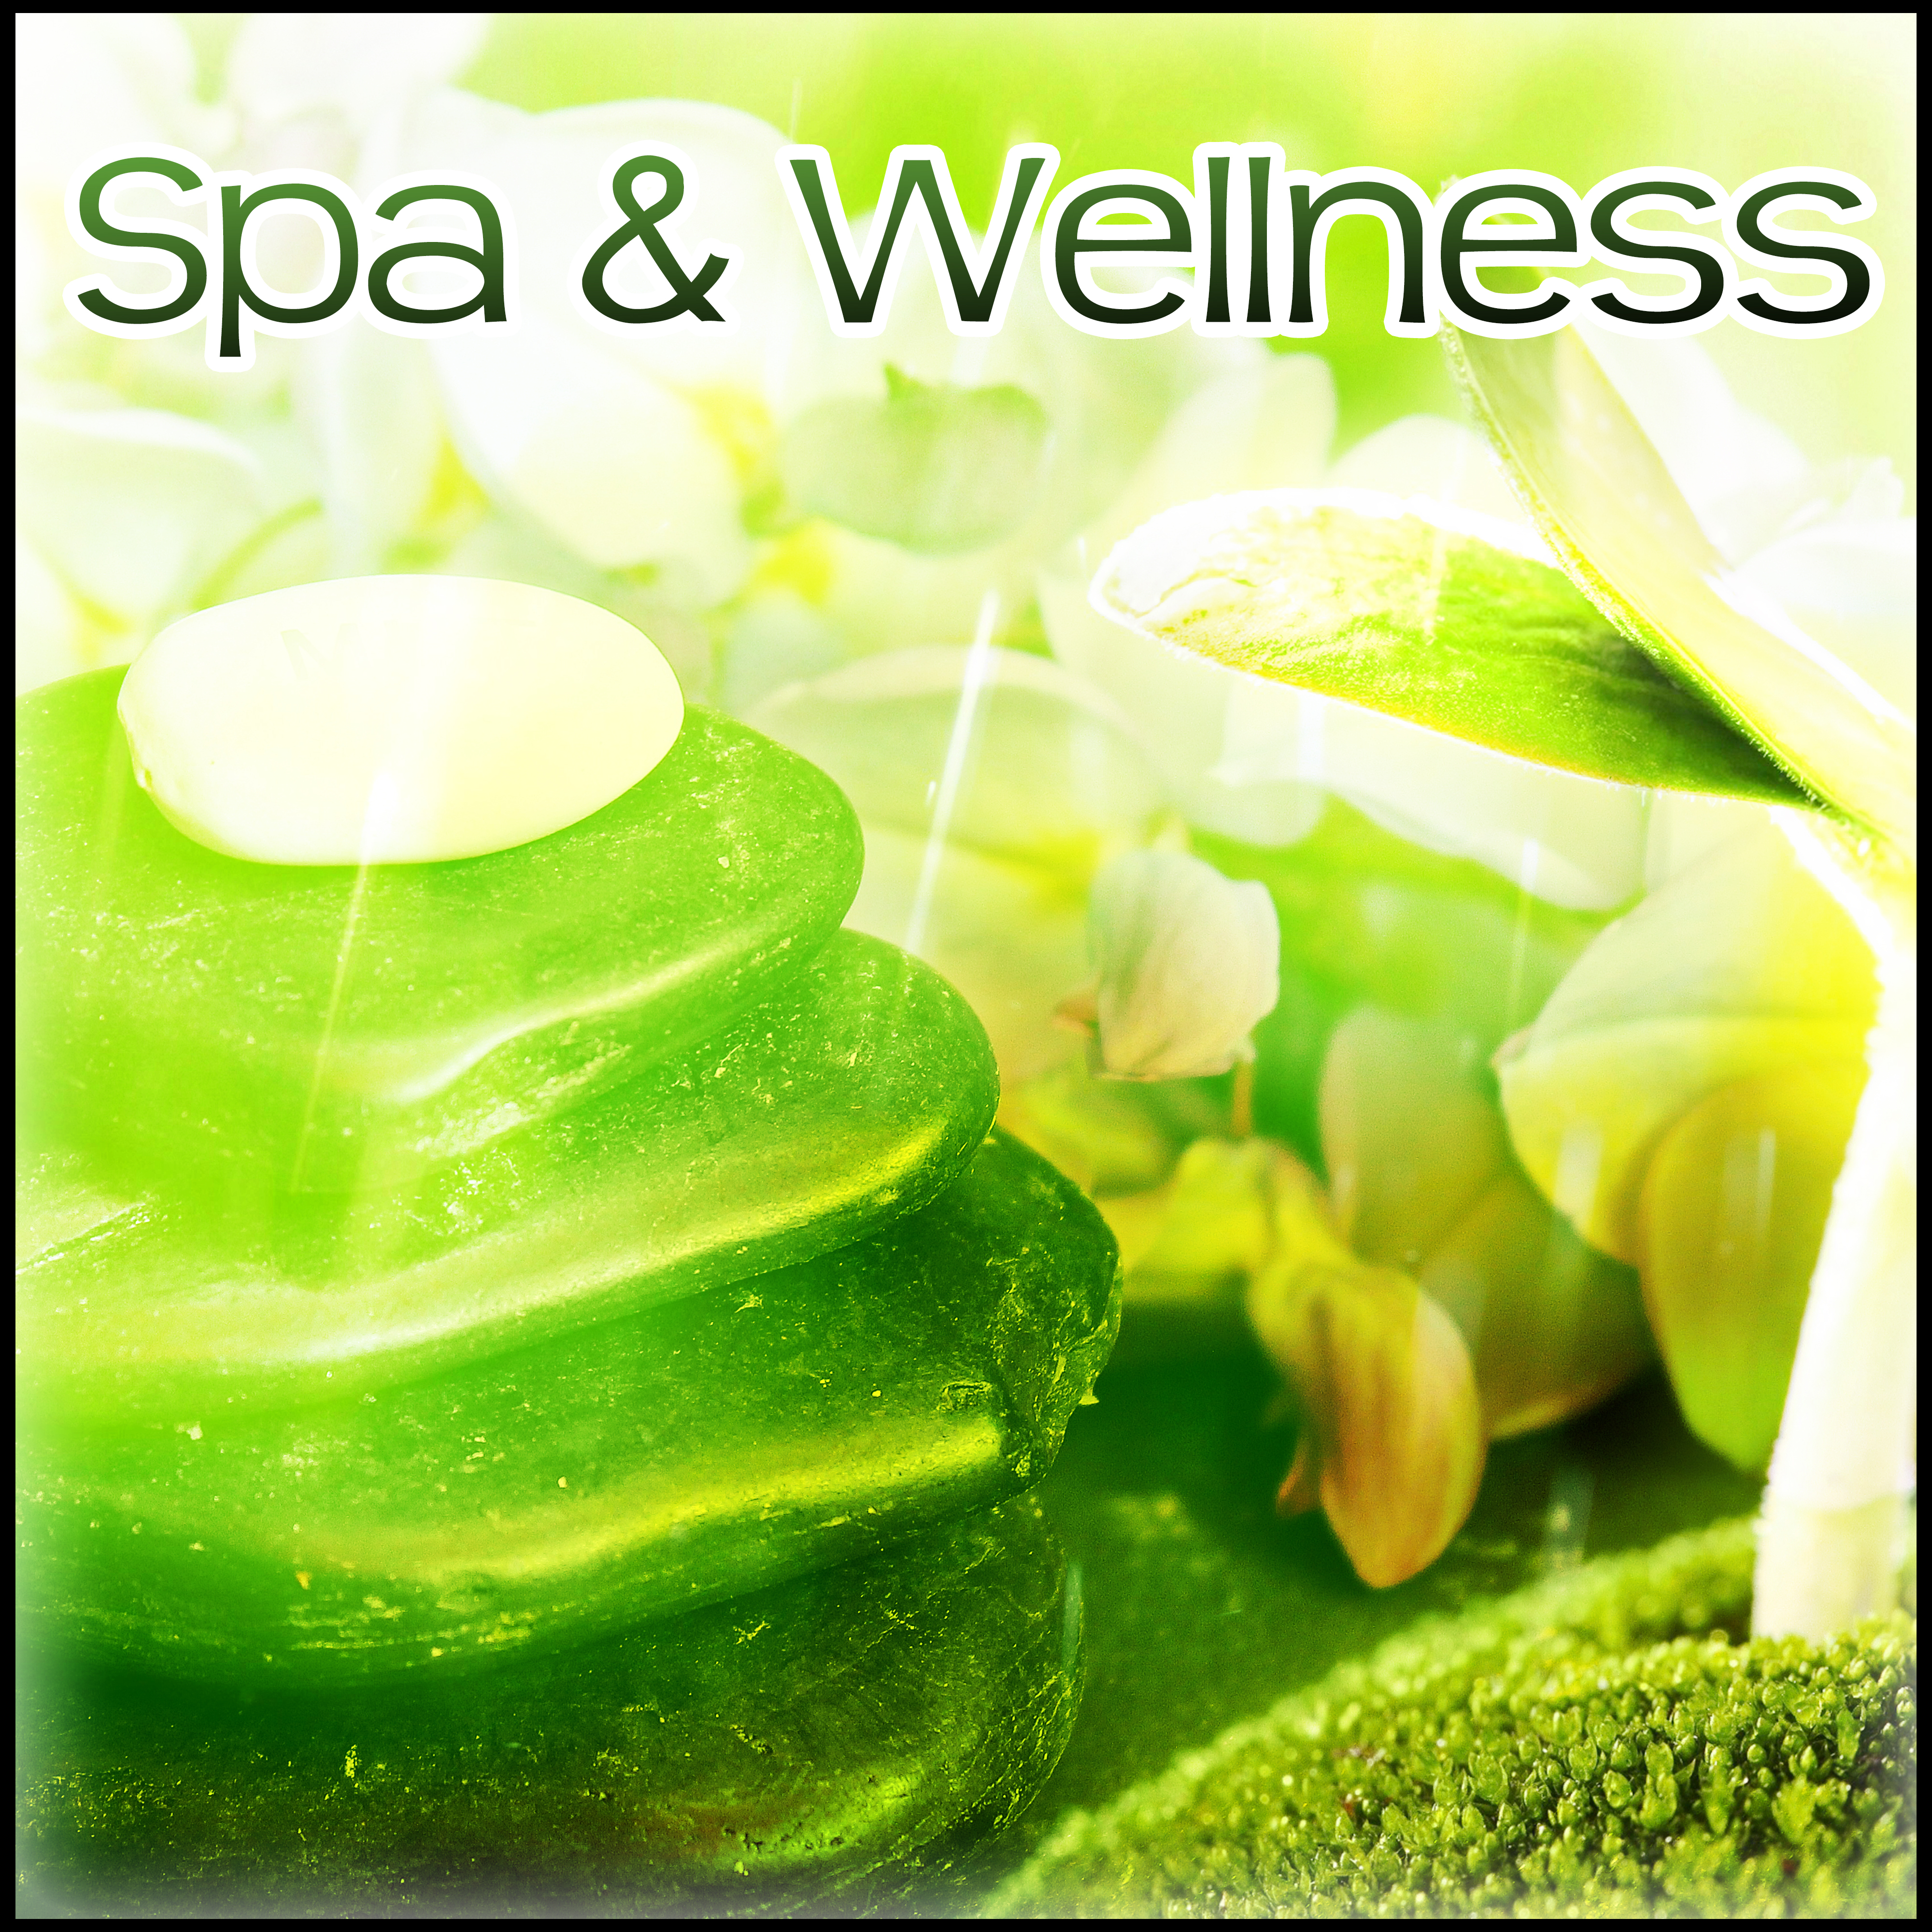 Spa & Wellness – Most Calmness Nature Sounds for Deep Relax while Spa & Beauty,  Calm Down Emotions and Enjoy Your Life, New Age Music